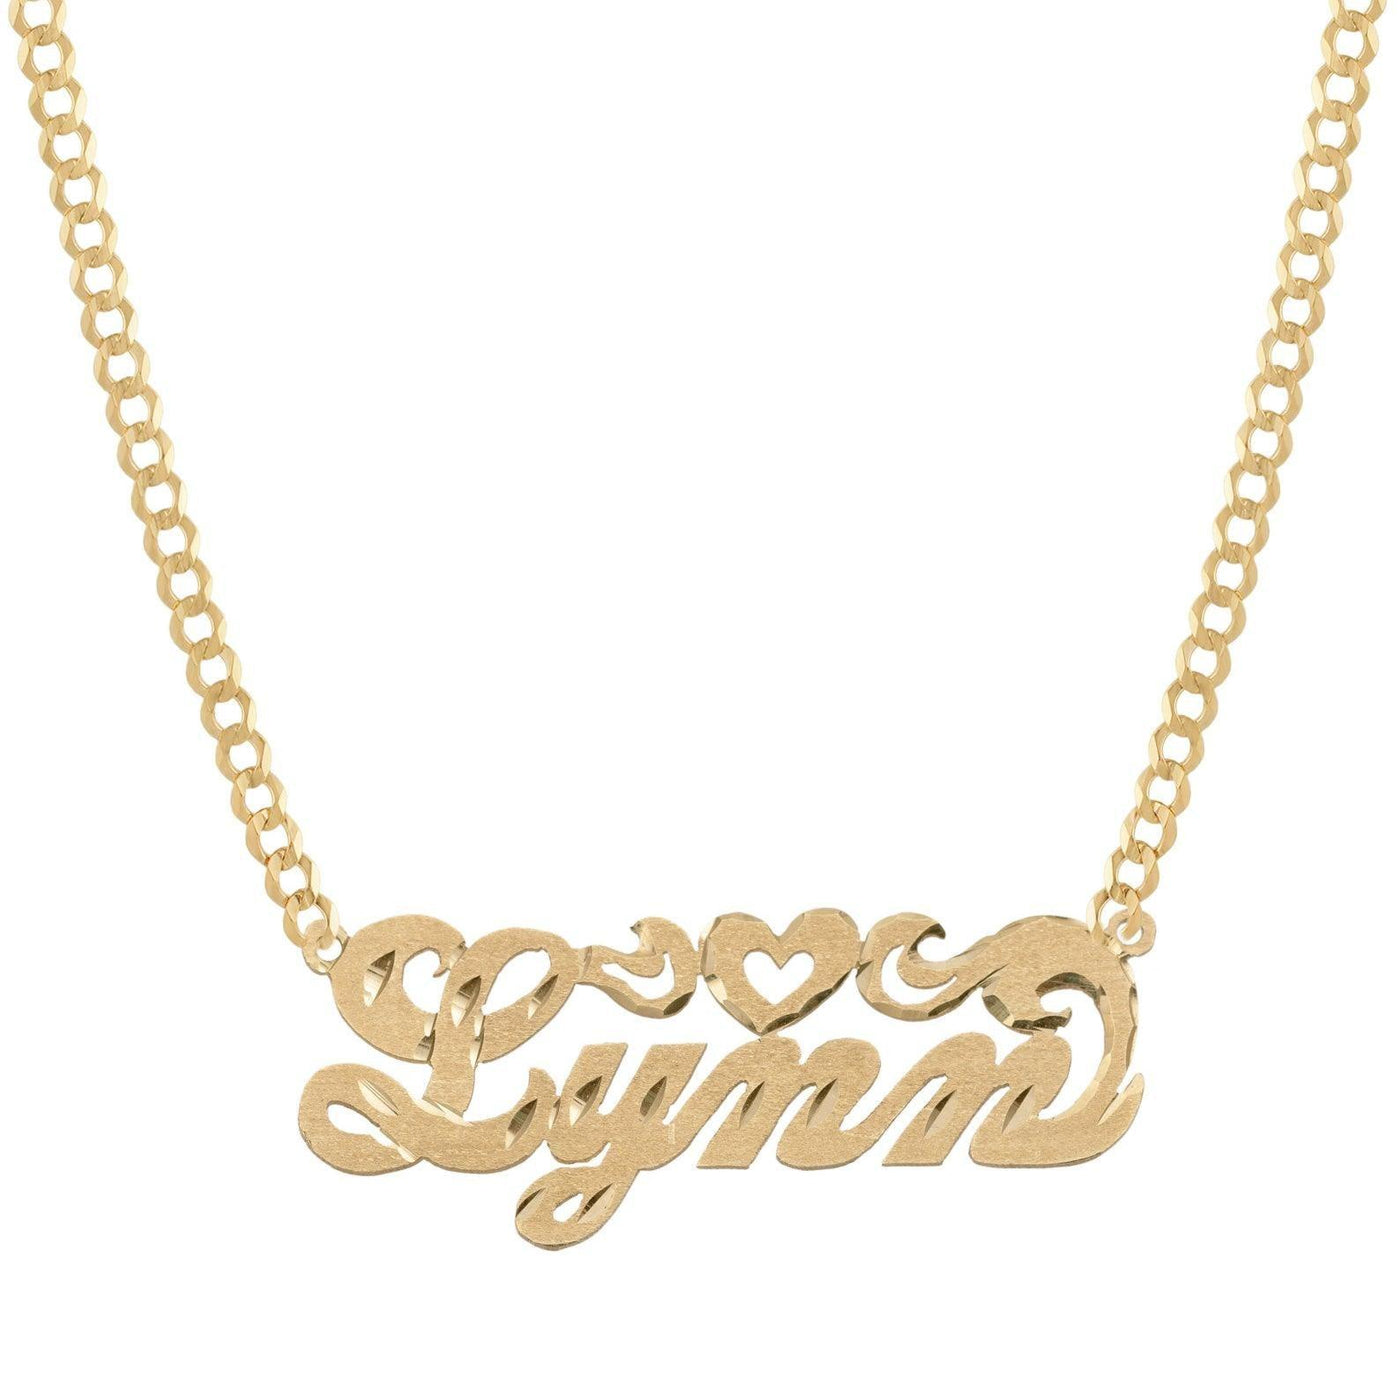 Ladies Script Name Plate Heart Ribbon Necklace 14K Gold - Style 129 - bayamjewelry